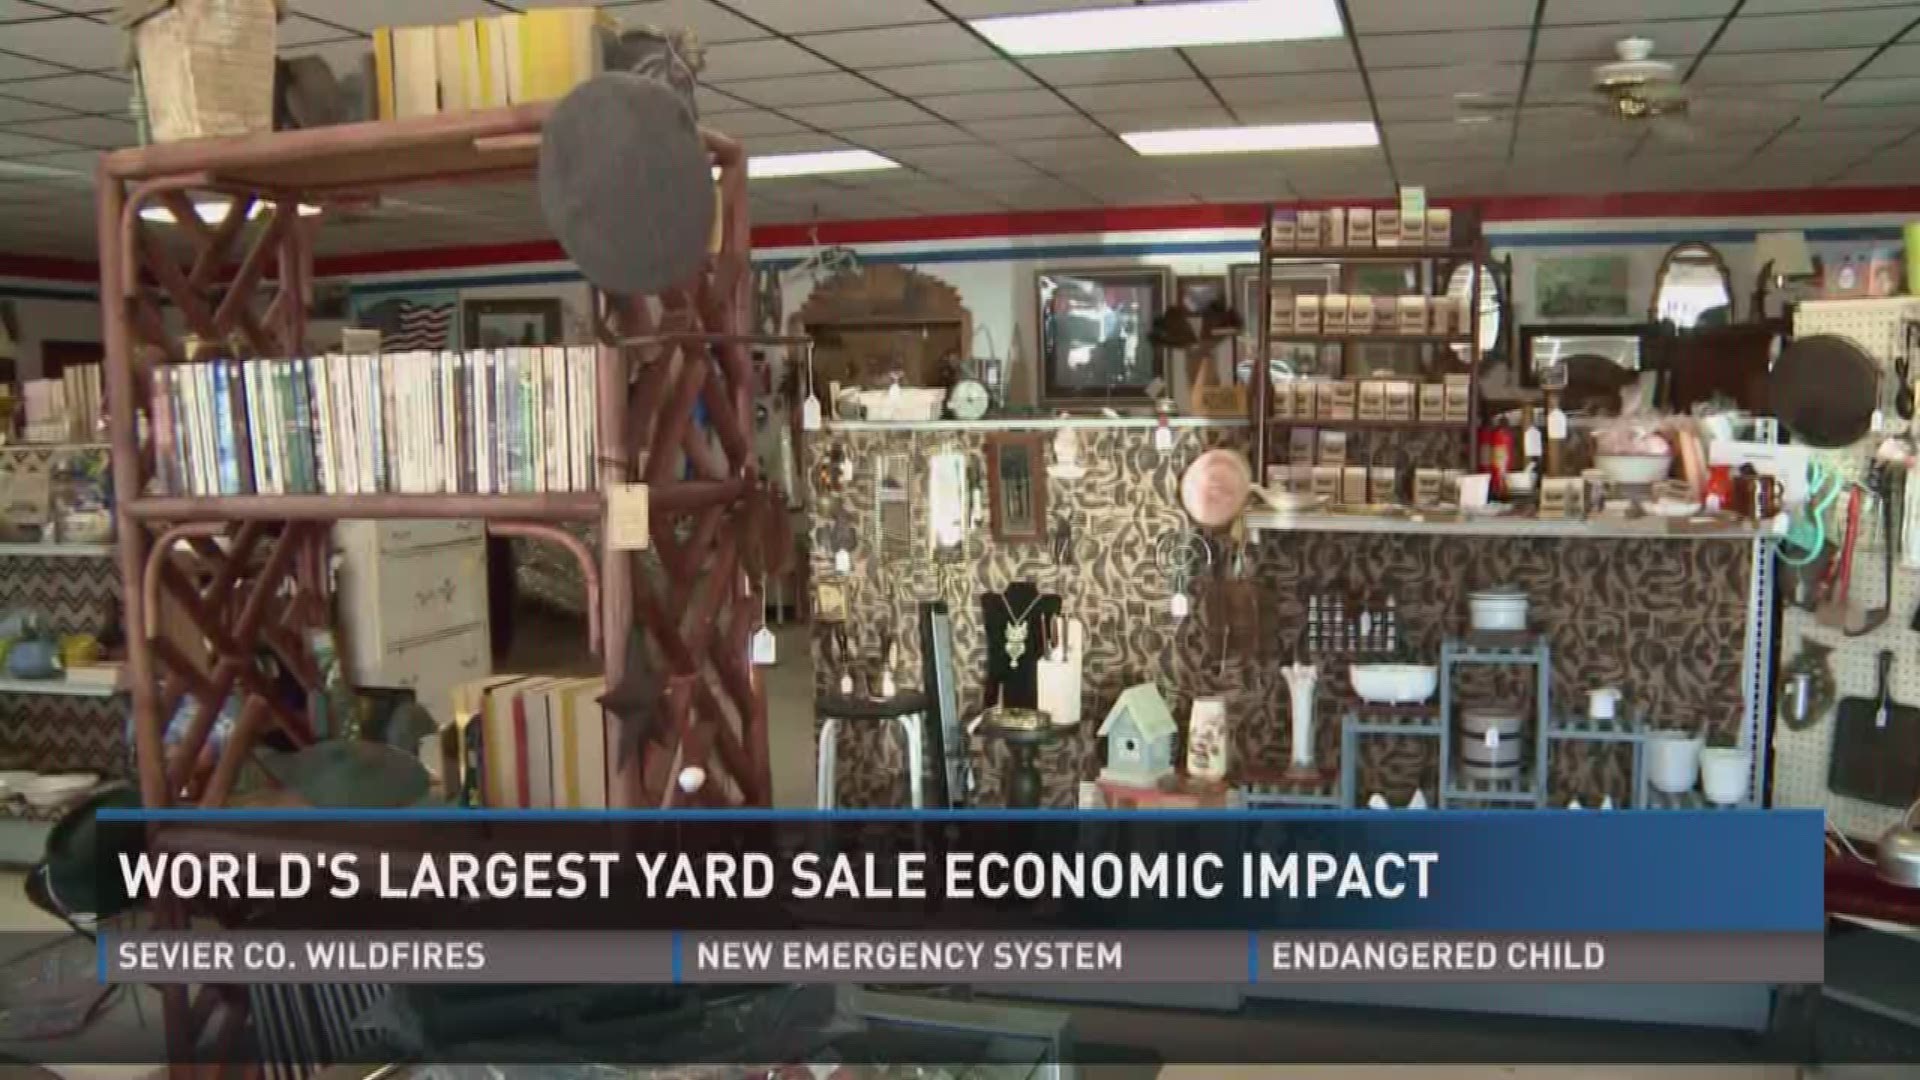 Longest yard sale benefits small town businesses.